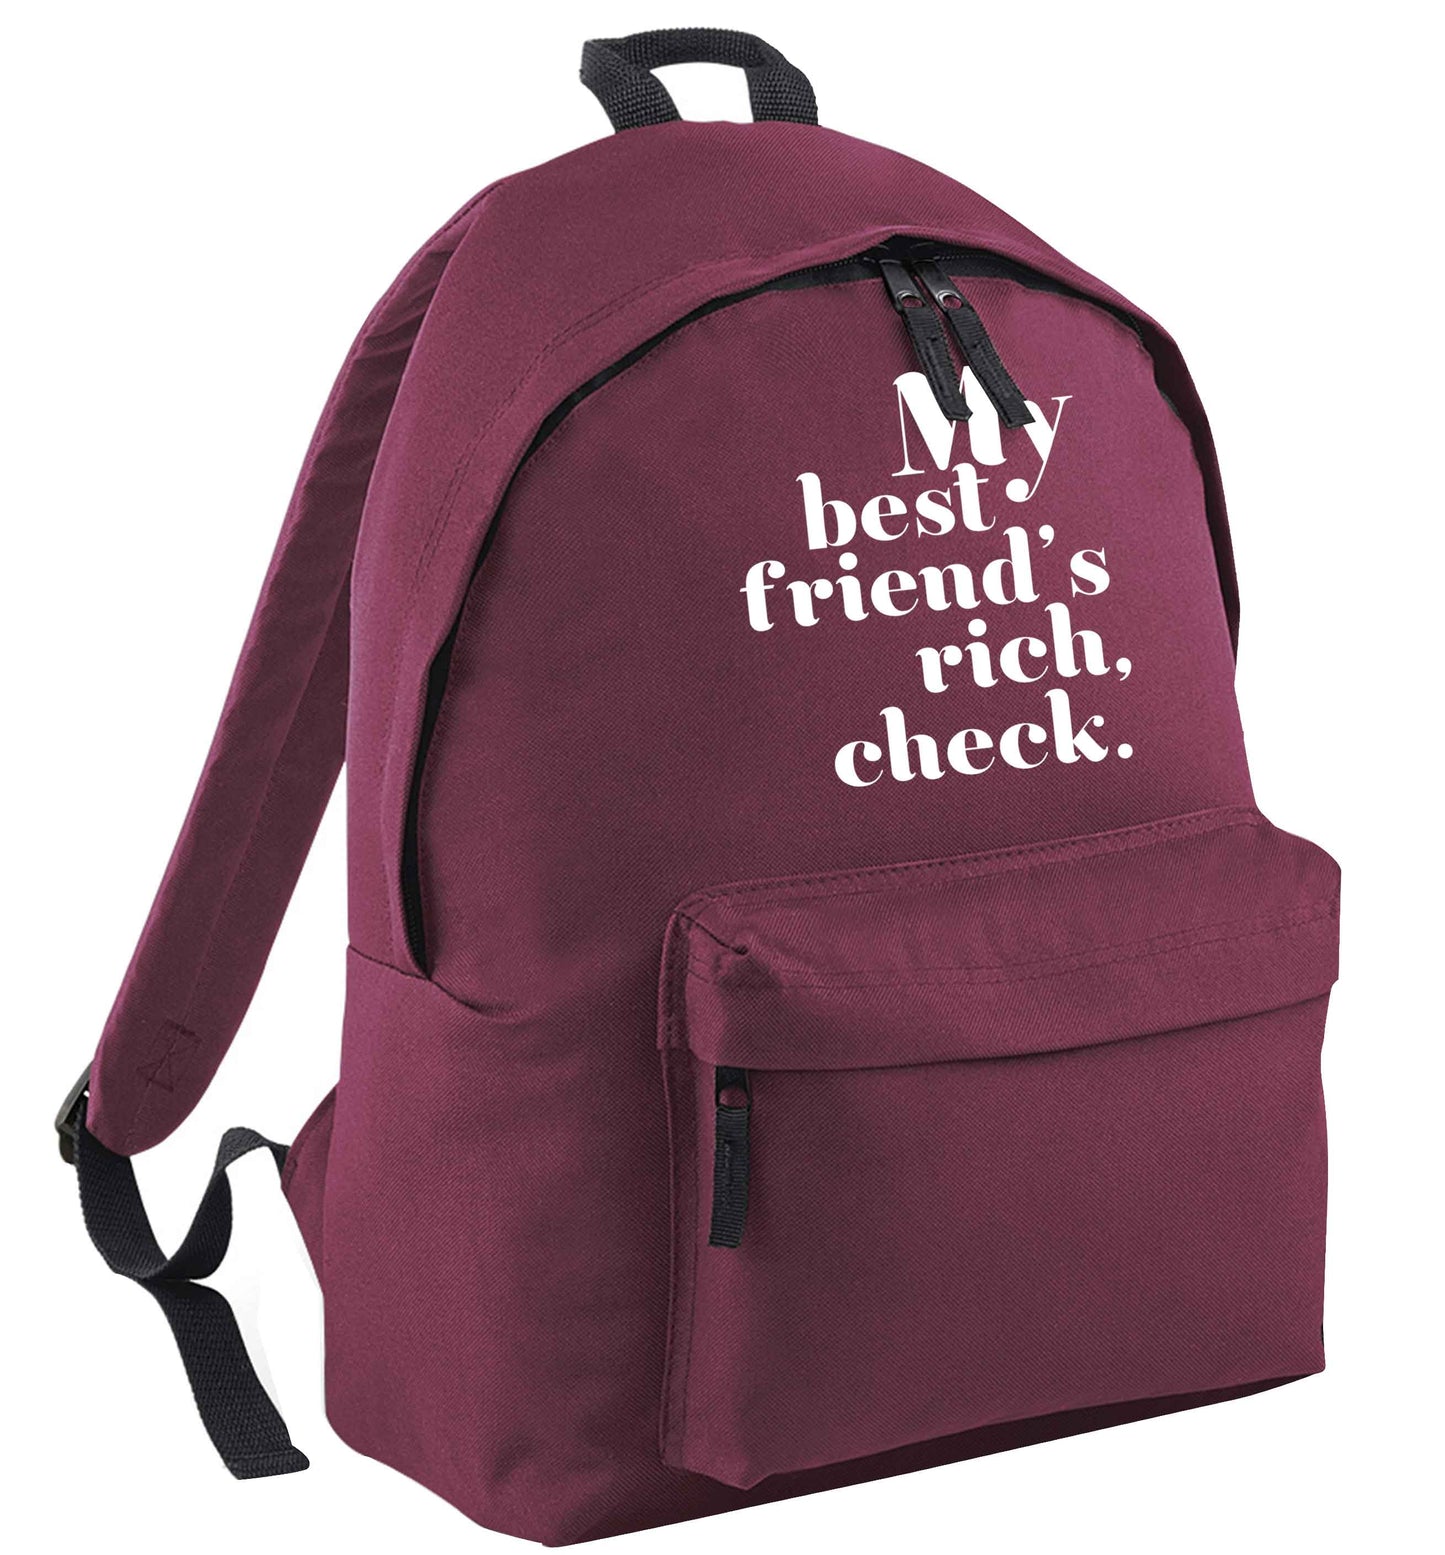 Got a rich best friend? Why not ask them to get you this, just let us  know and we'll tripple the price ;)  maroon adults backpack